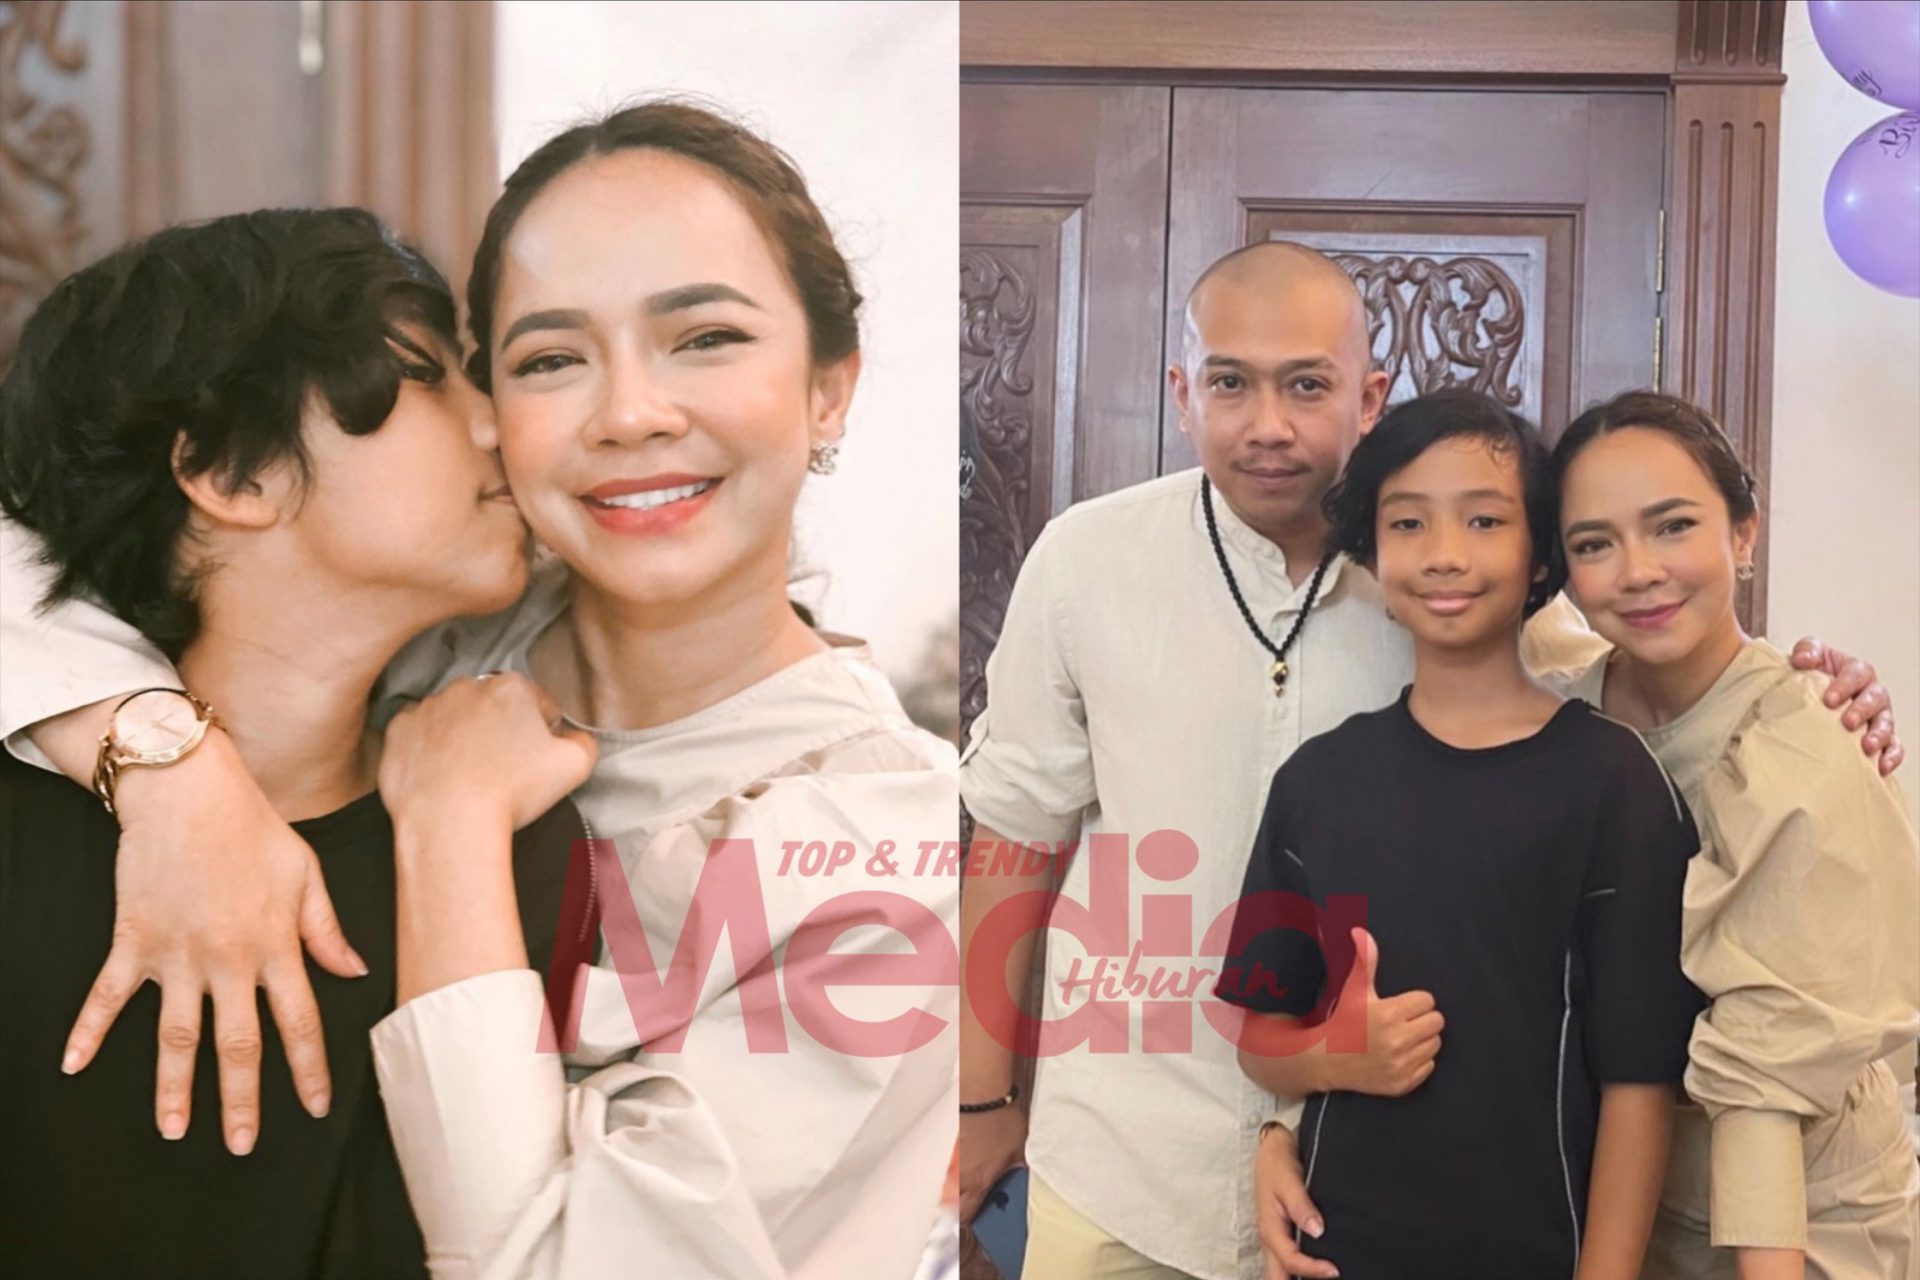 “You Are Not Allowed To Have Instagram Even At This Age&#8230;.” &#8211; Genap 12 Tahun, Ucapan Nora Danish Buat Anak Sulung Bikin Ramai Tersentuh